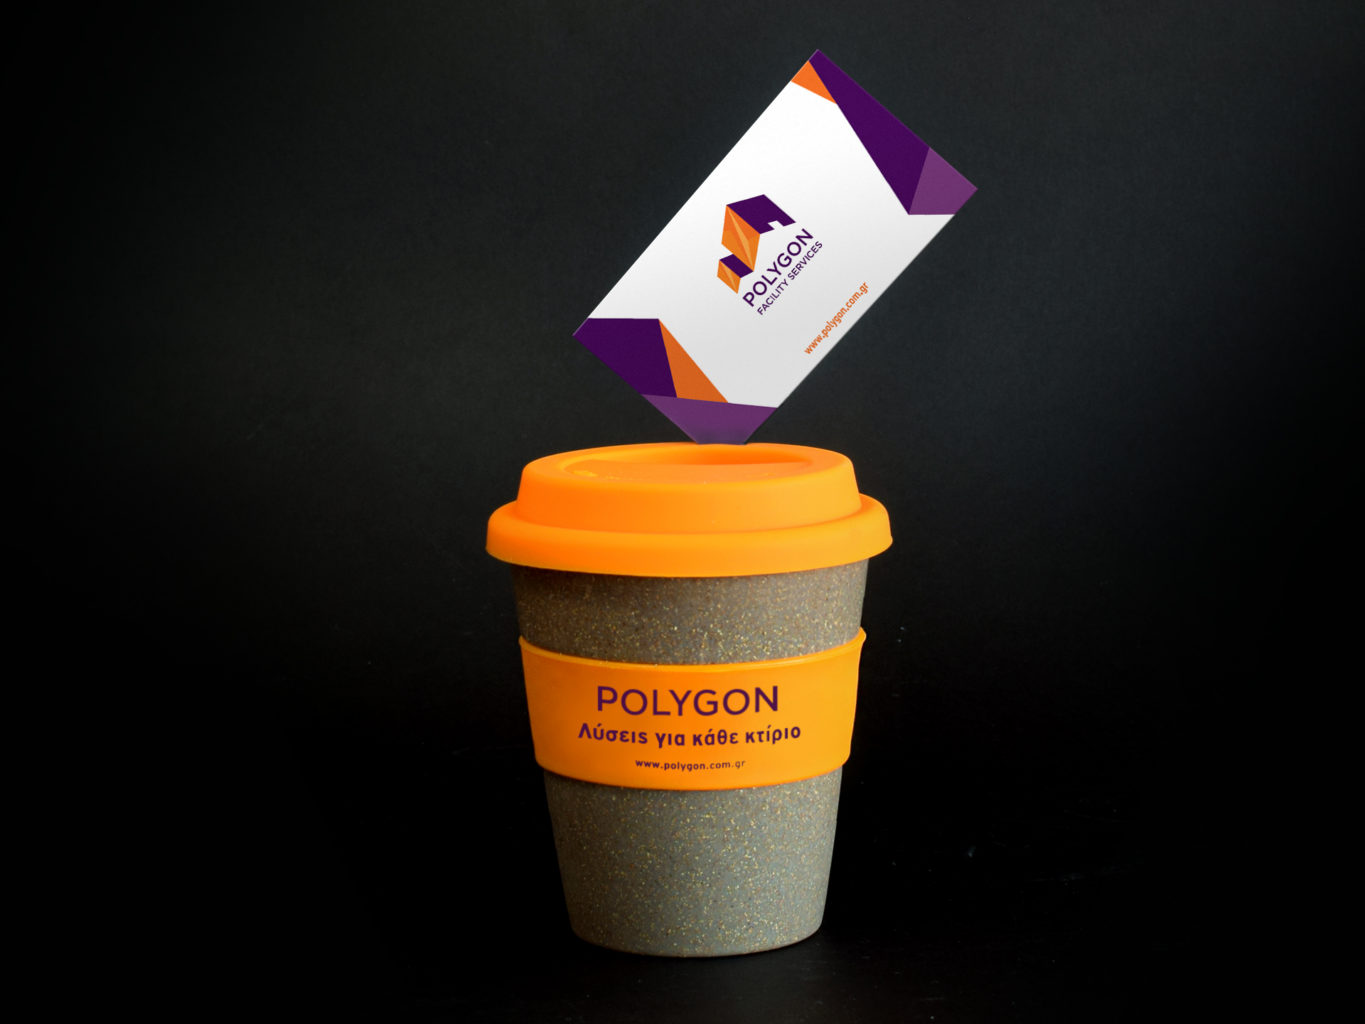 polygon facility services cup and business card with their logo